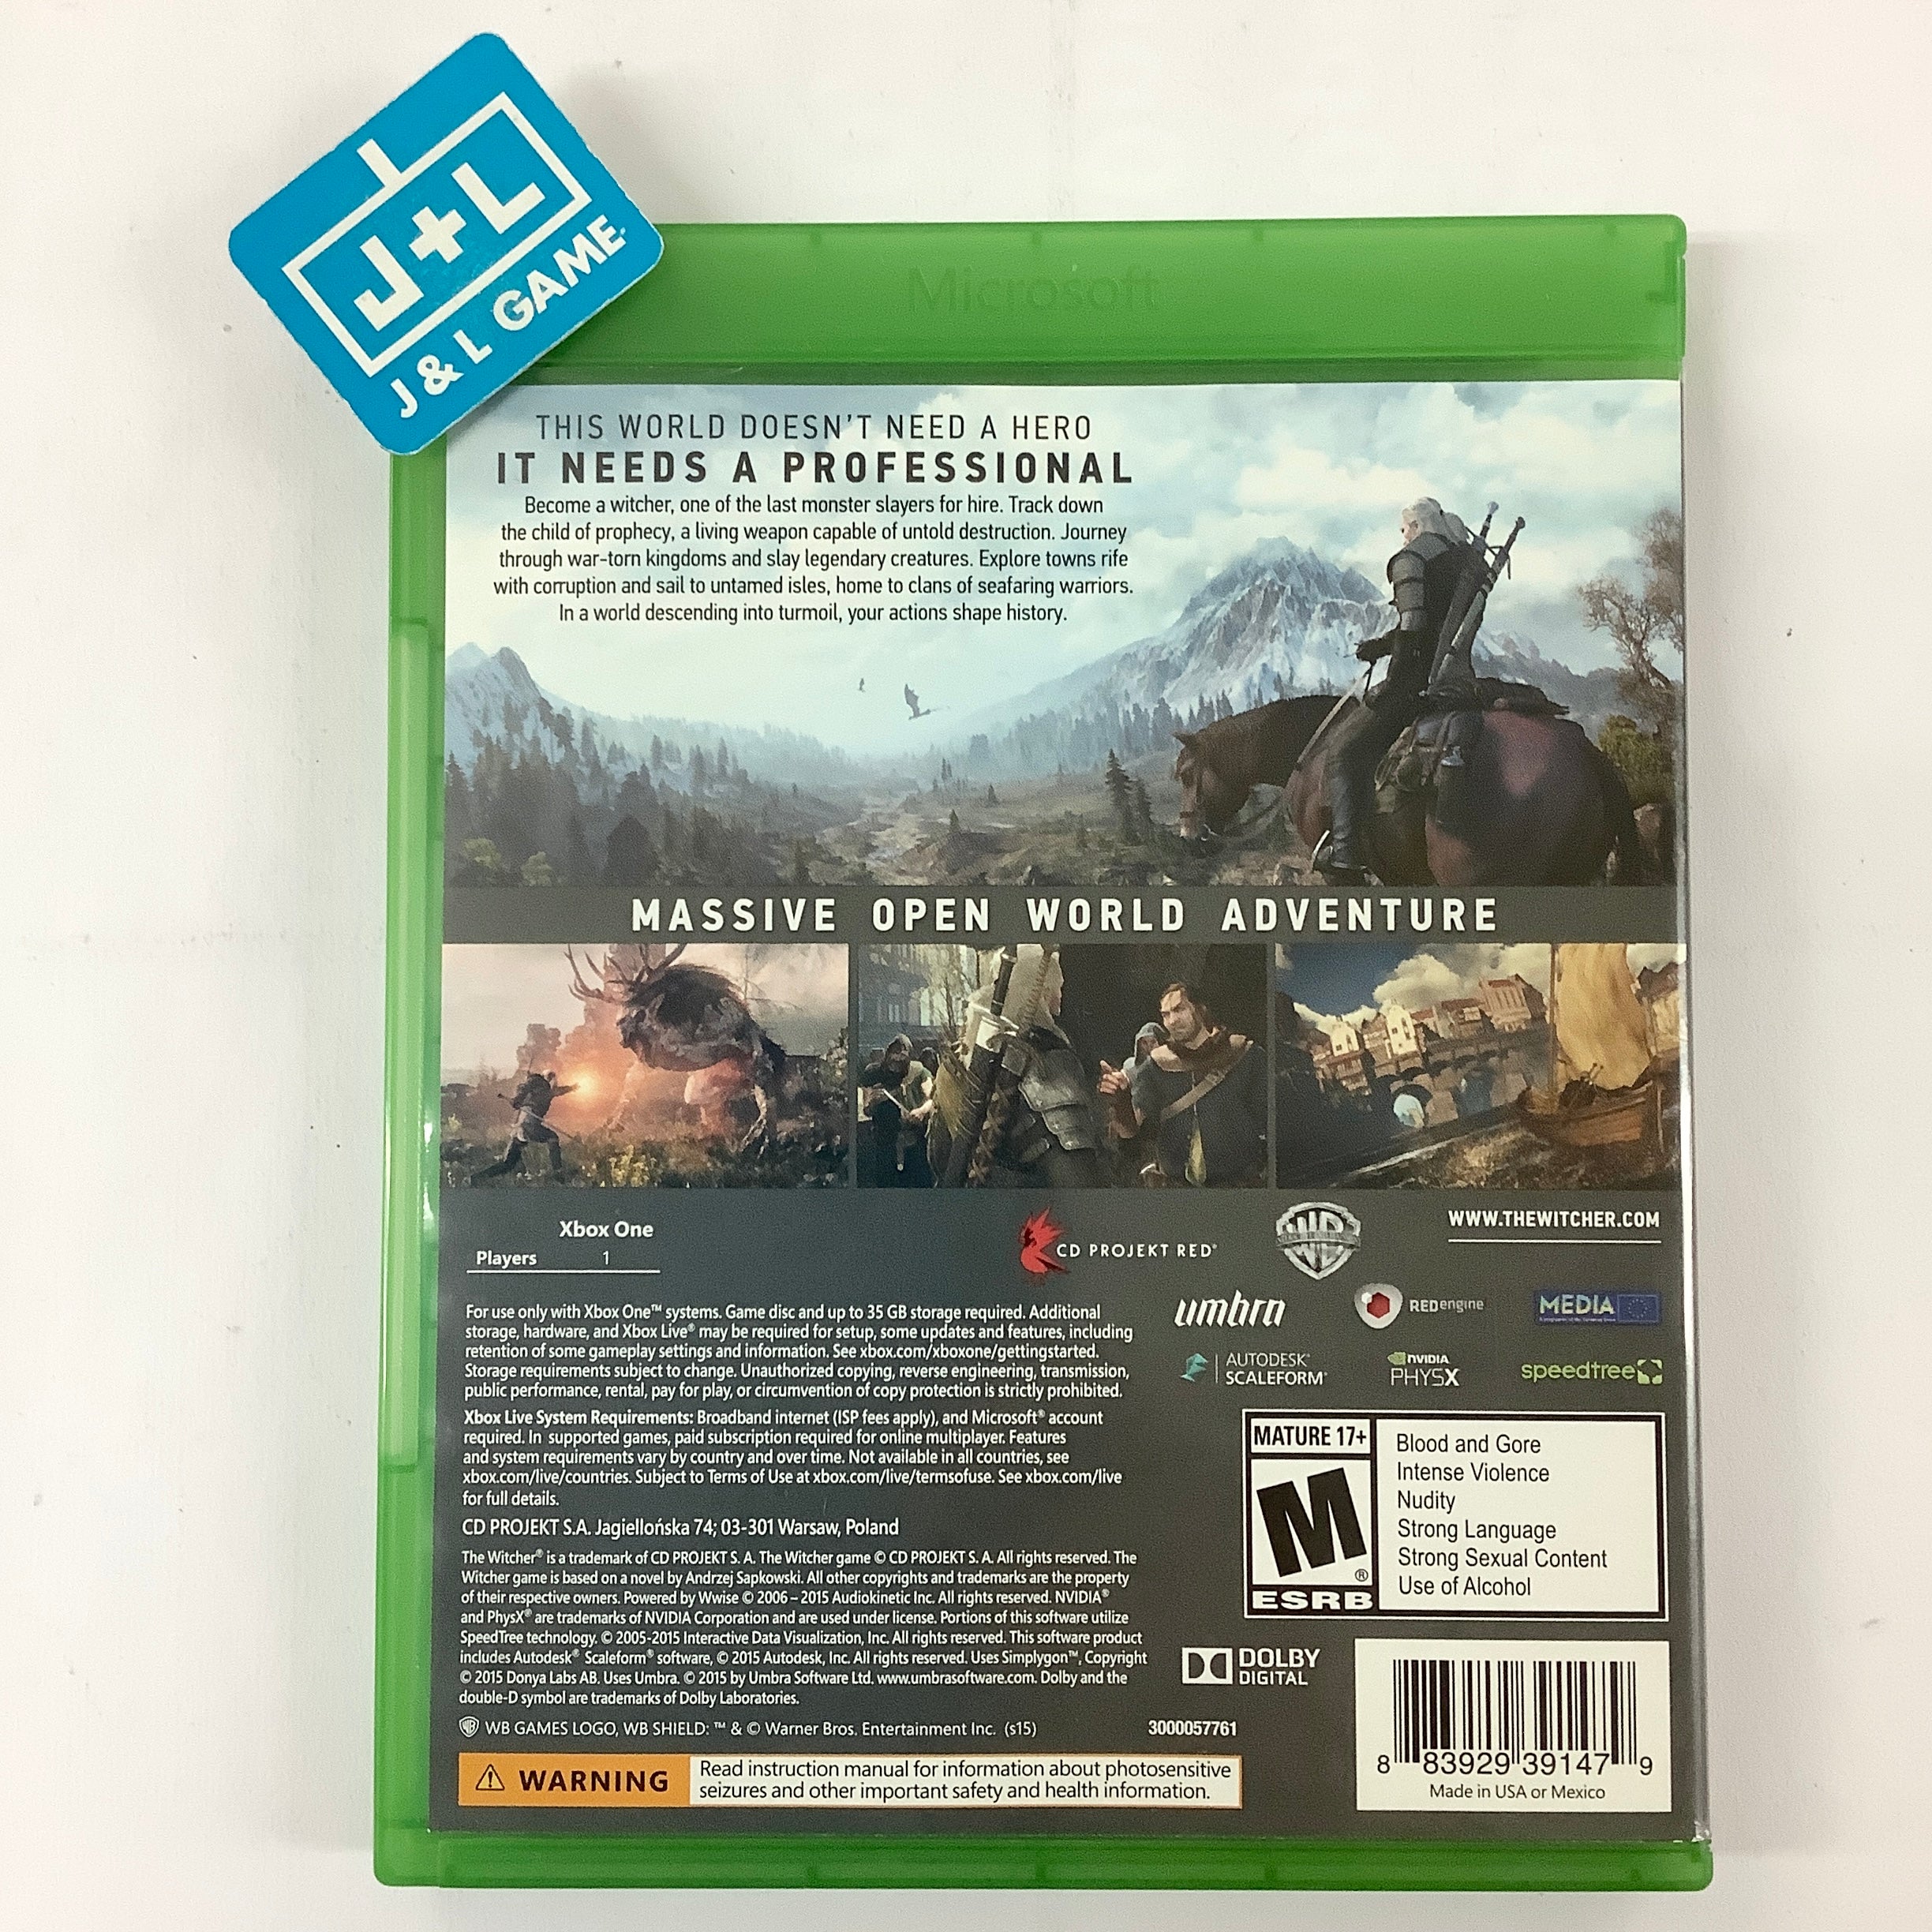 Witcher 3: Wild Hunt - (XB1) Xbox One [Pre-Owned] Video Games WB Games   